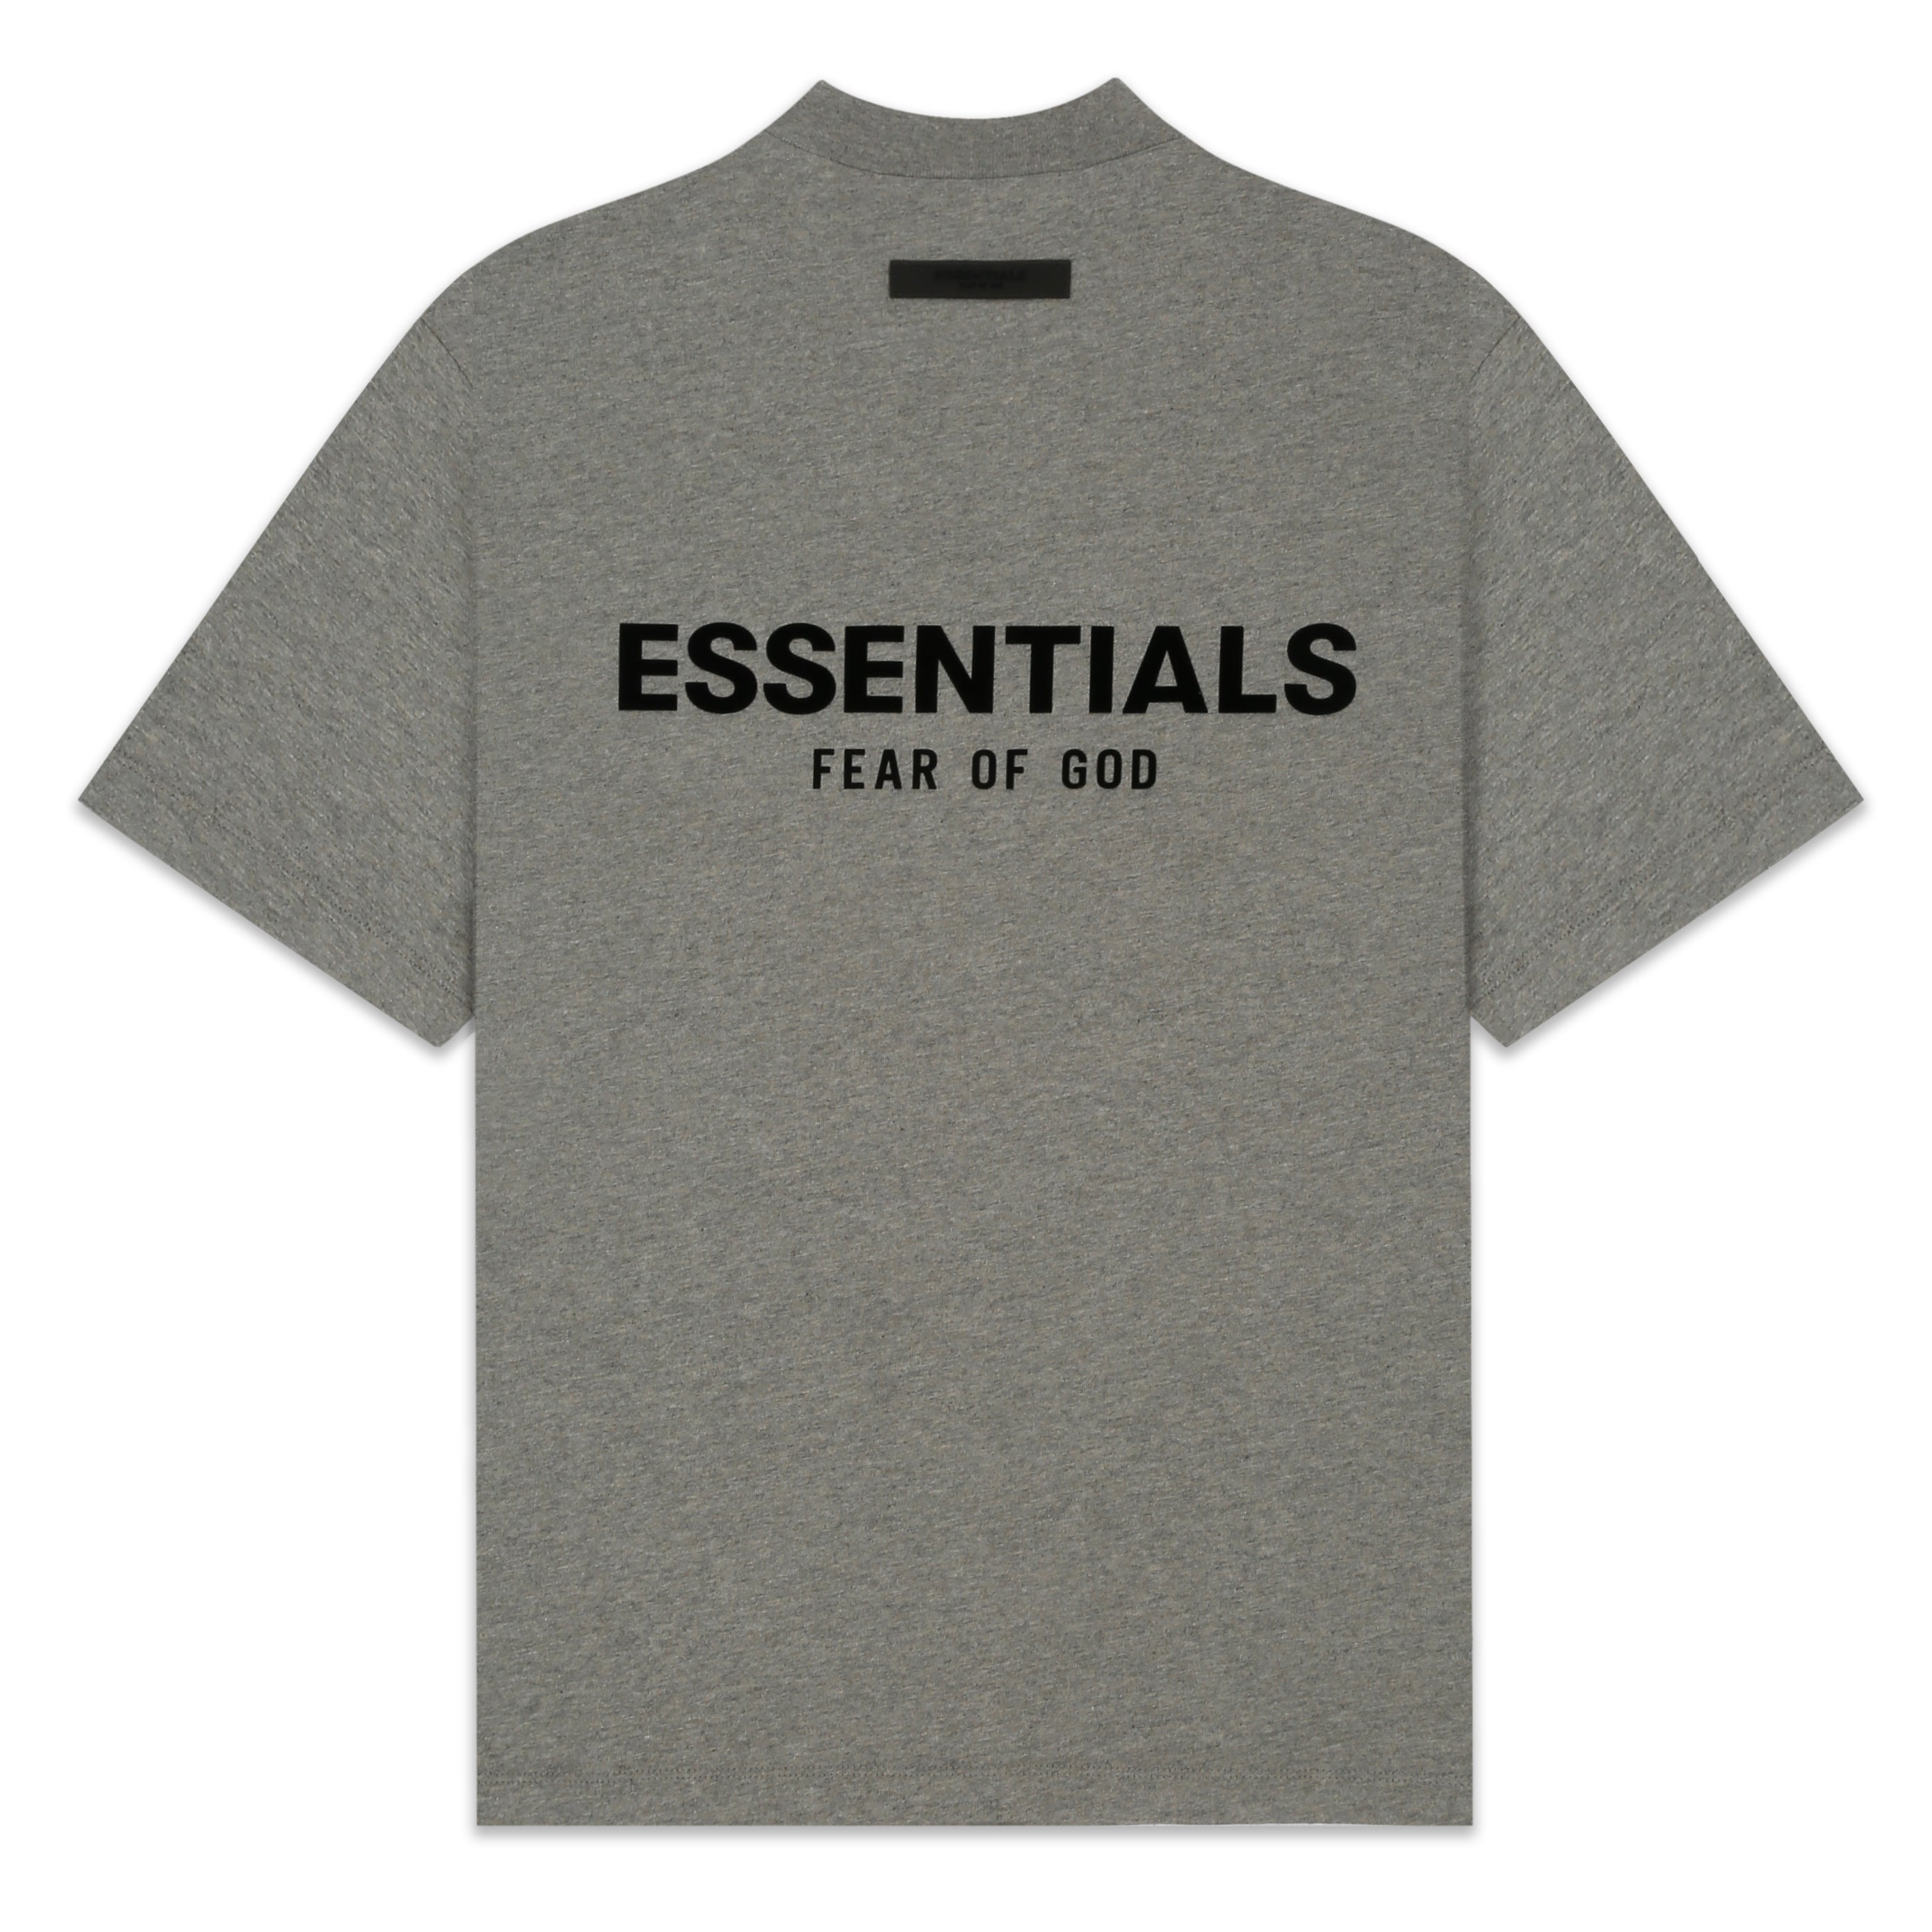 T-SHIRTS BY FEAR OF GOD ESSENTIALS